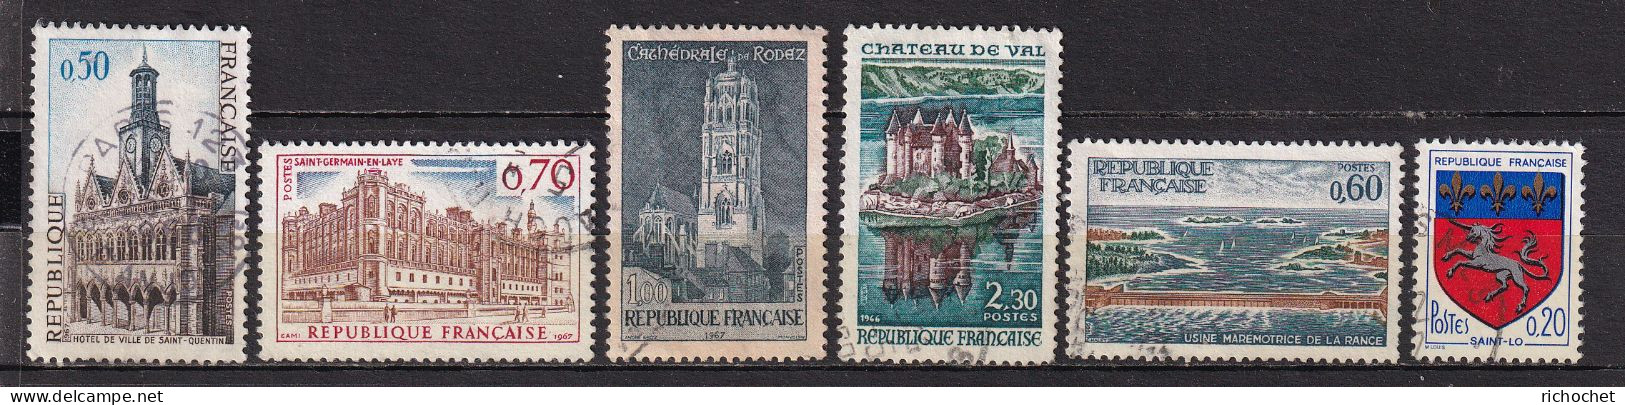 France 1499 + 1501 + 1504 + 1506 + 1507 + 1510  ° - Used Stamps